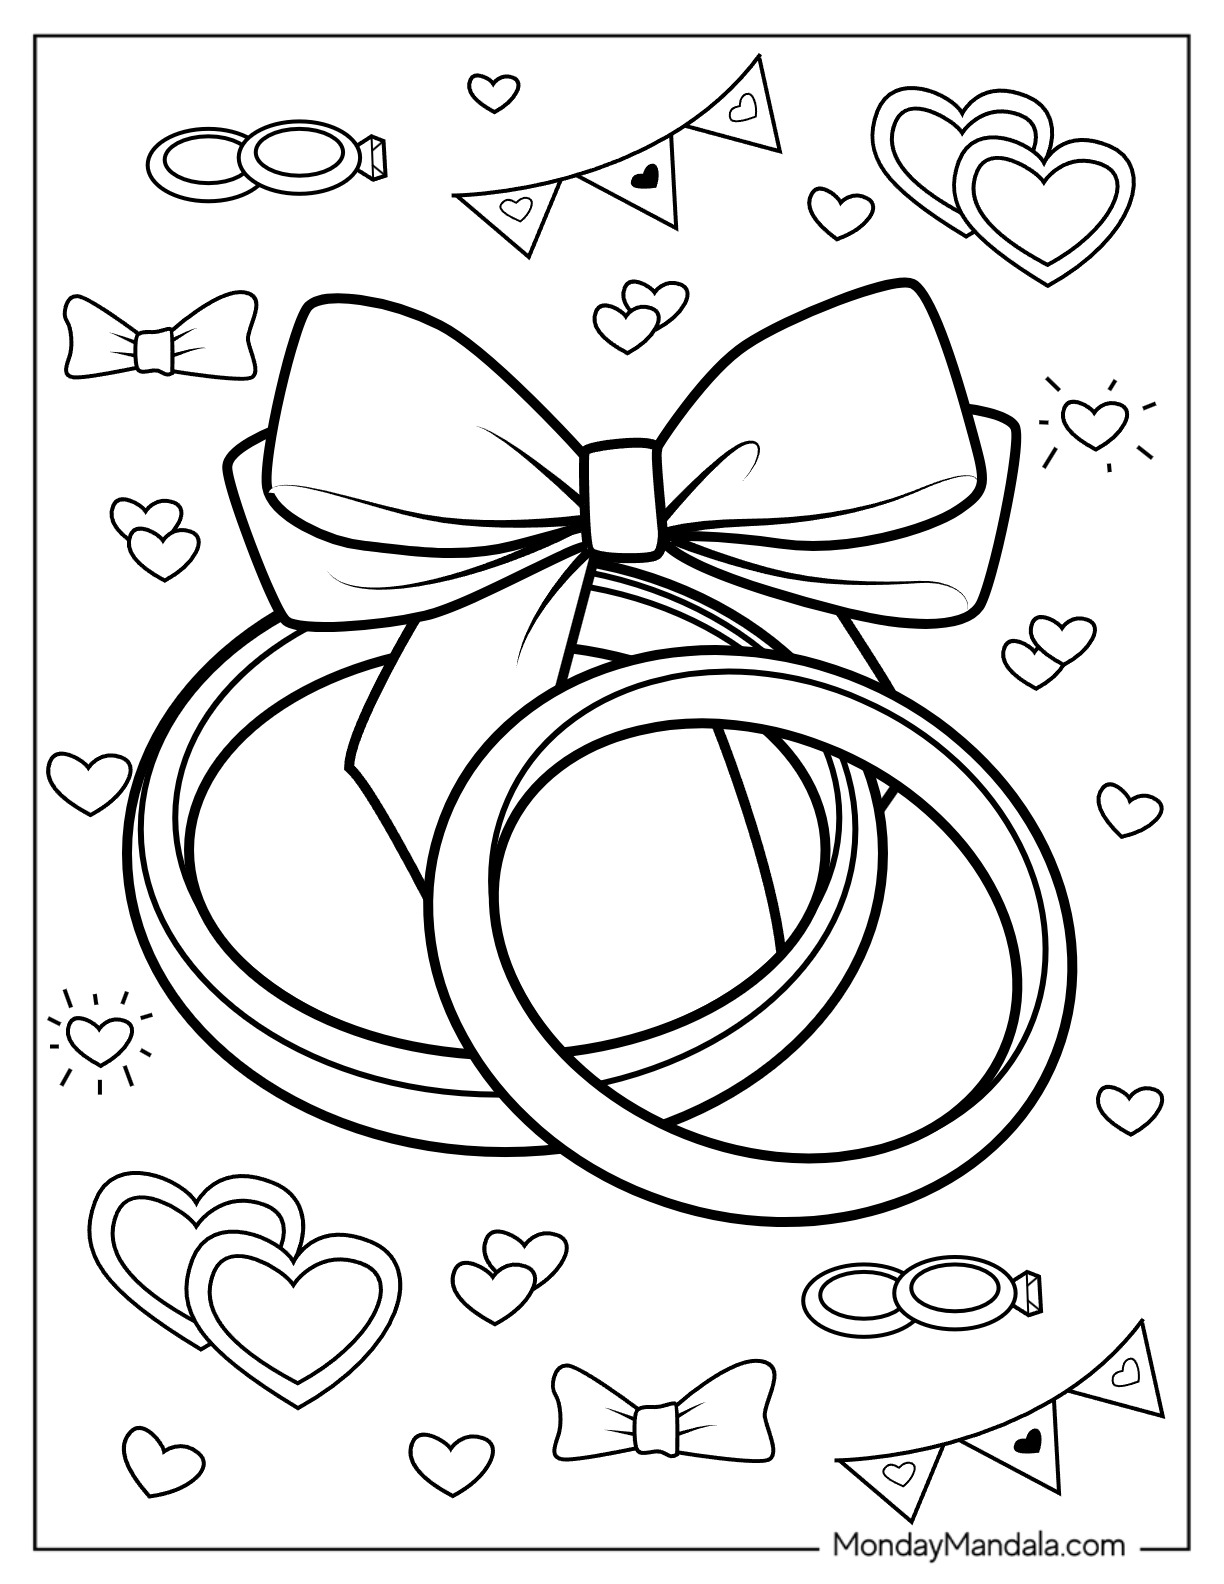 Wedding coloring pages free pdf printables